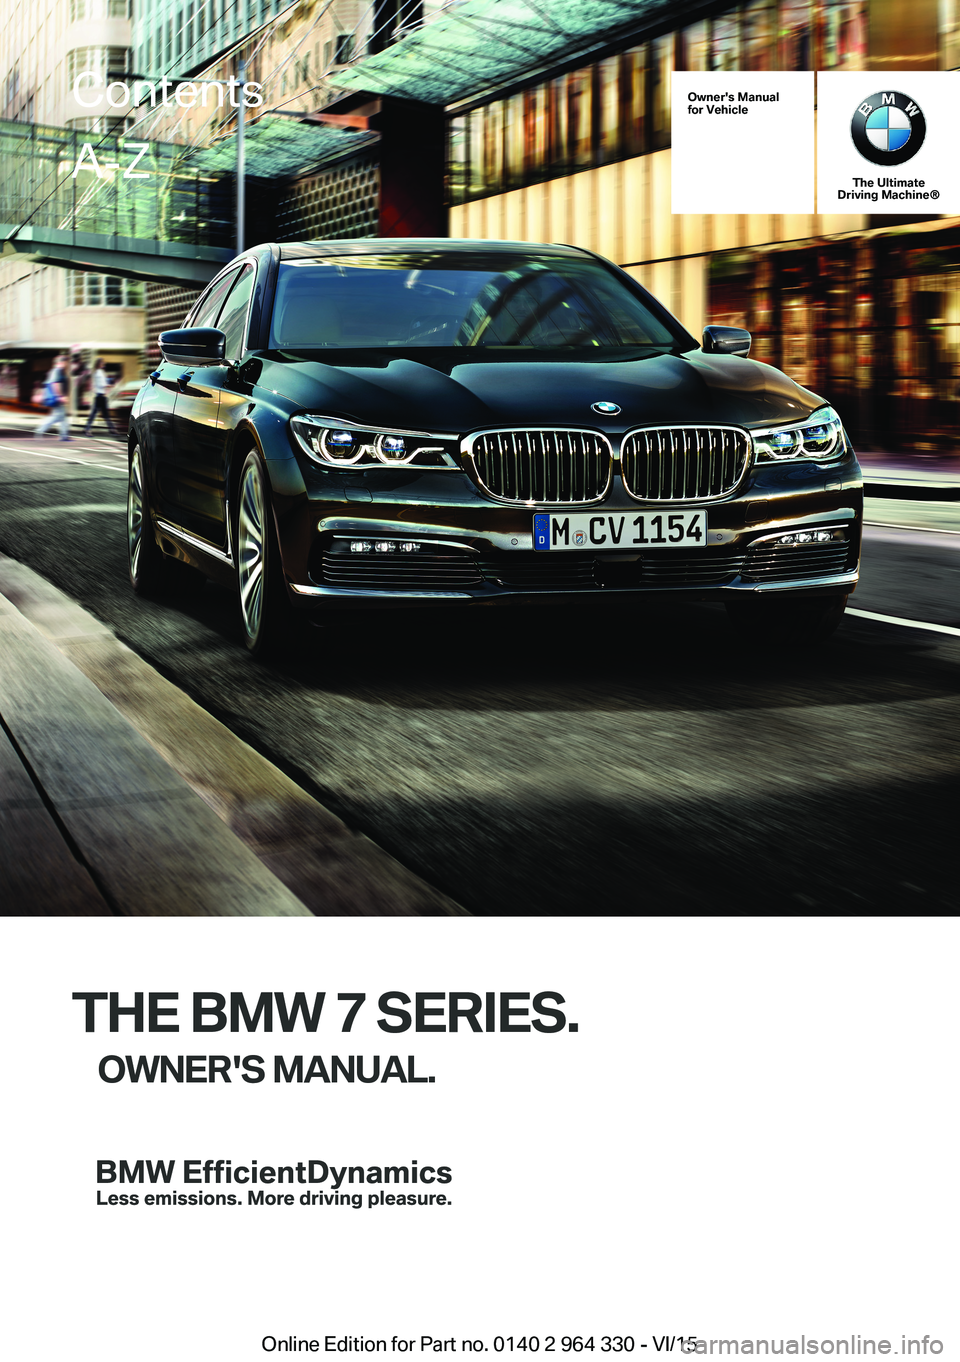 BMW 750LI SEDAN 2015  Owners Manual Owner's Manualfor Vehicle
The UltimateDriving Machine®
THE BMW 7 SERIES.
OWNER'S MANUAL.ContentsA-Z
Online Edition for Part no. 0140 2 964 330 - VI/15   